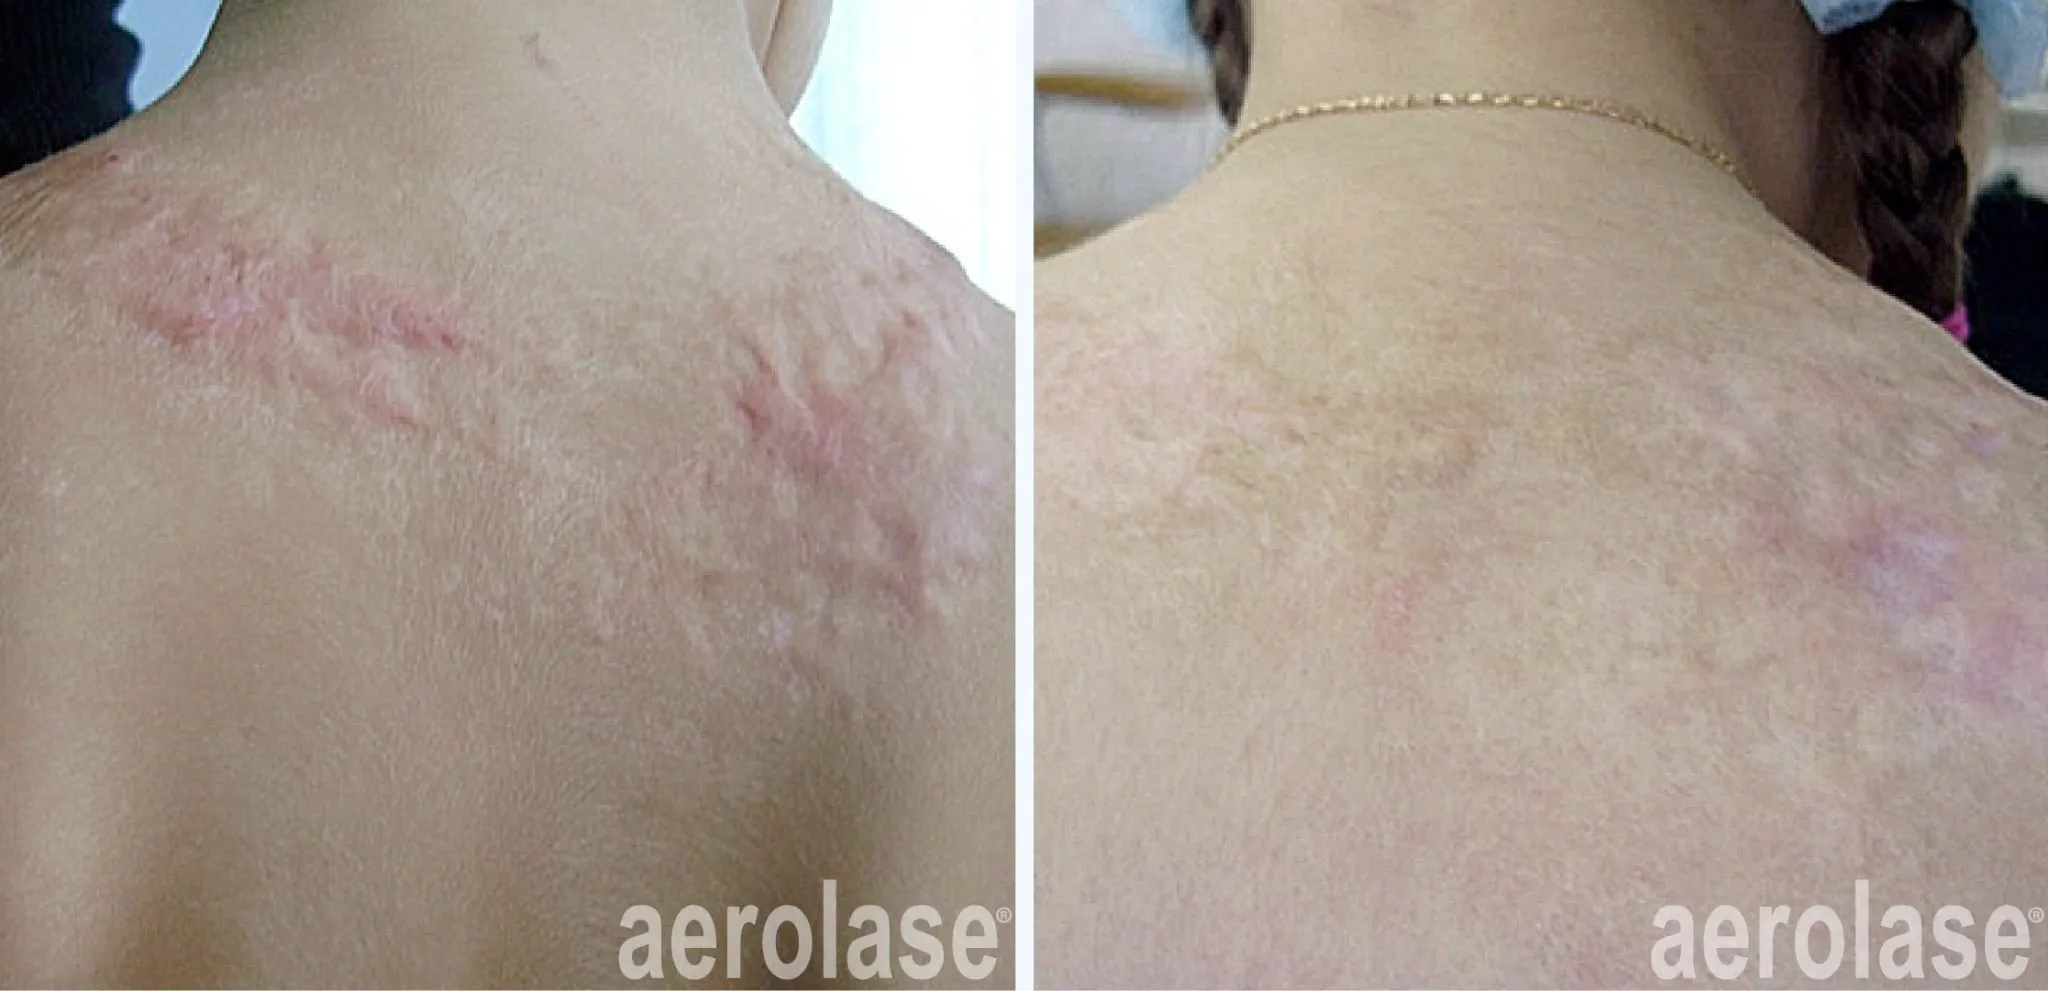 burn-scar-drzoyaklimova-before-and-after